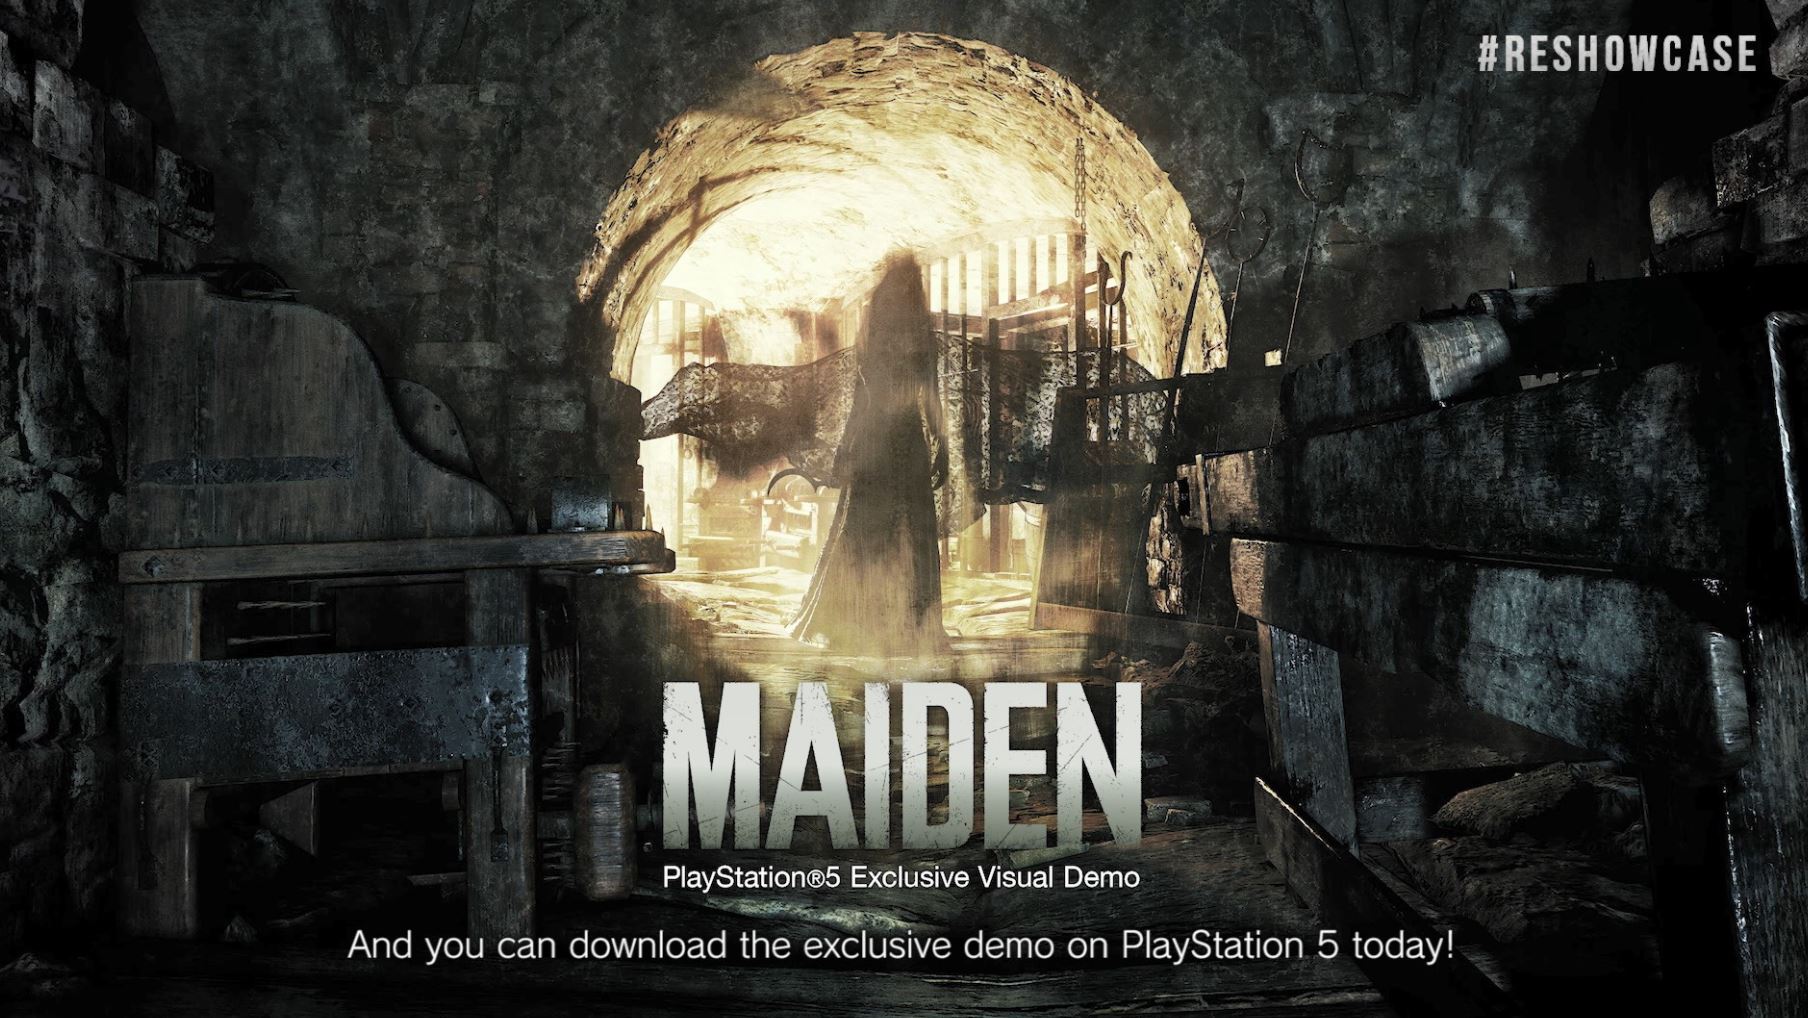 Resident Evil Village exclusive ‘Maiden’ demo for PS5 available today